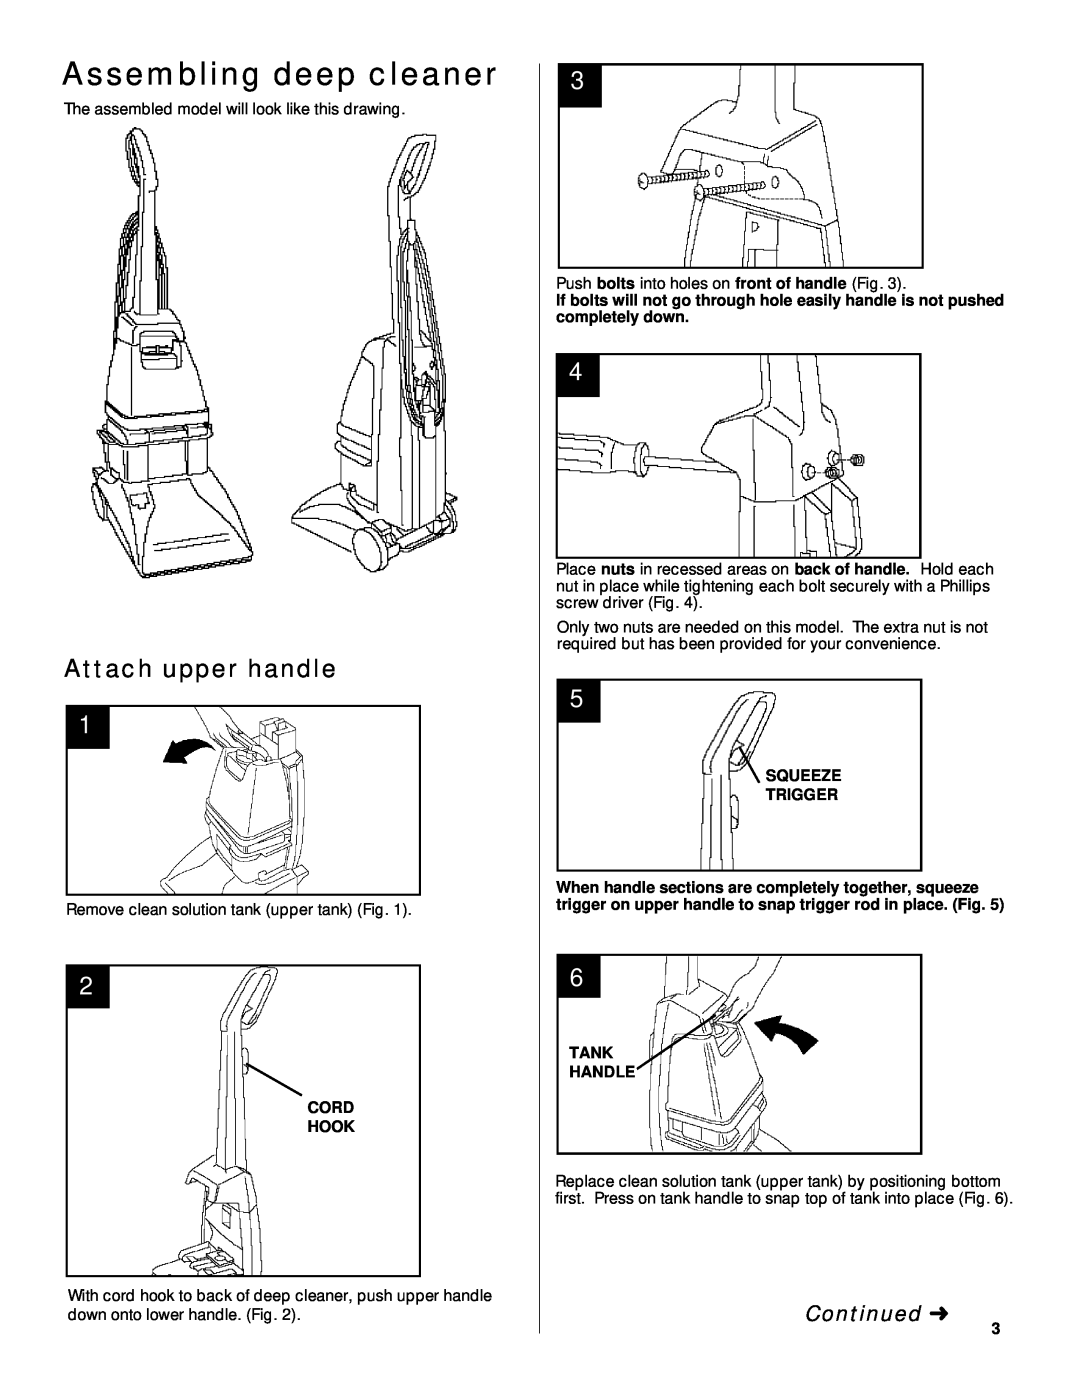 Hoover Deep Cleaner owner manual Assembling deep cleaner, Attach upper handle, Continued 